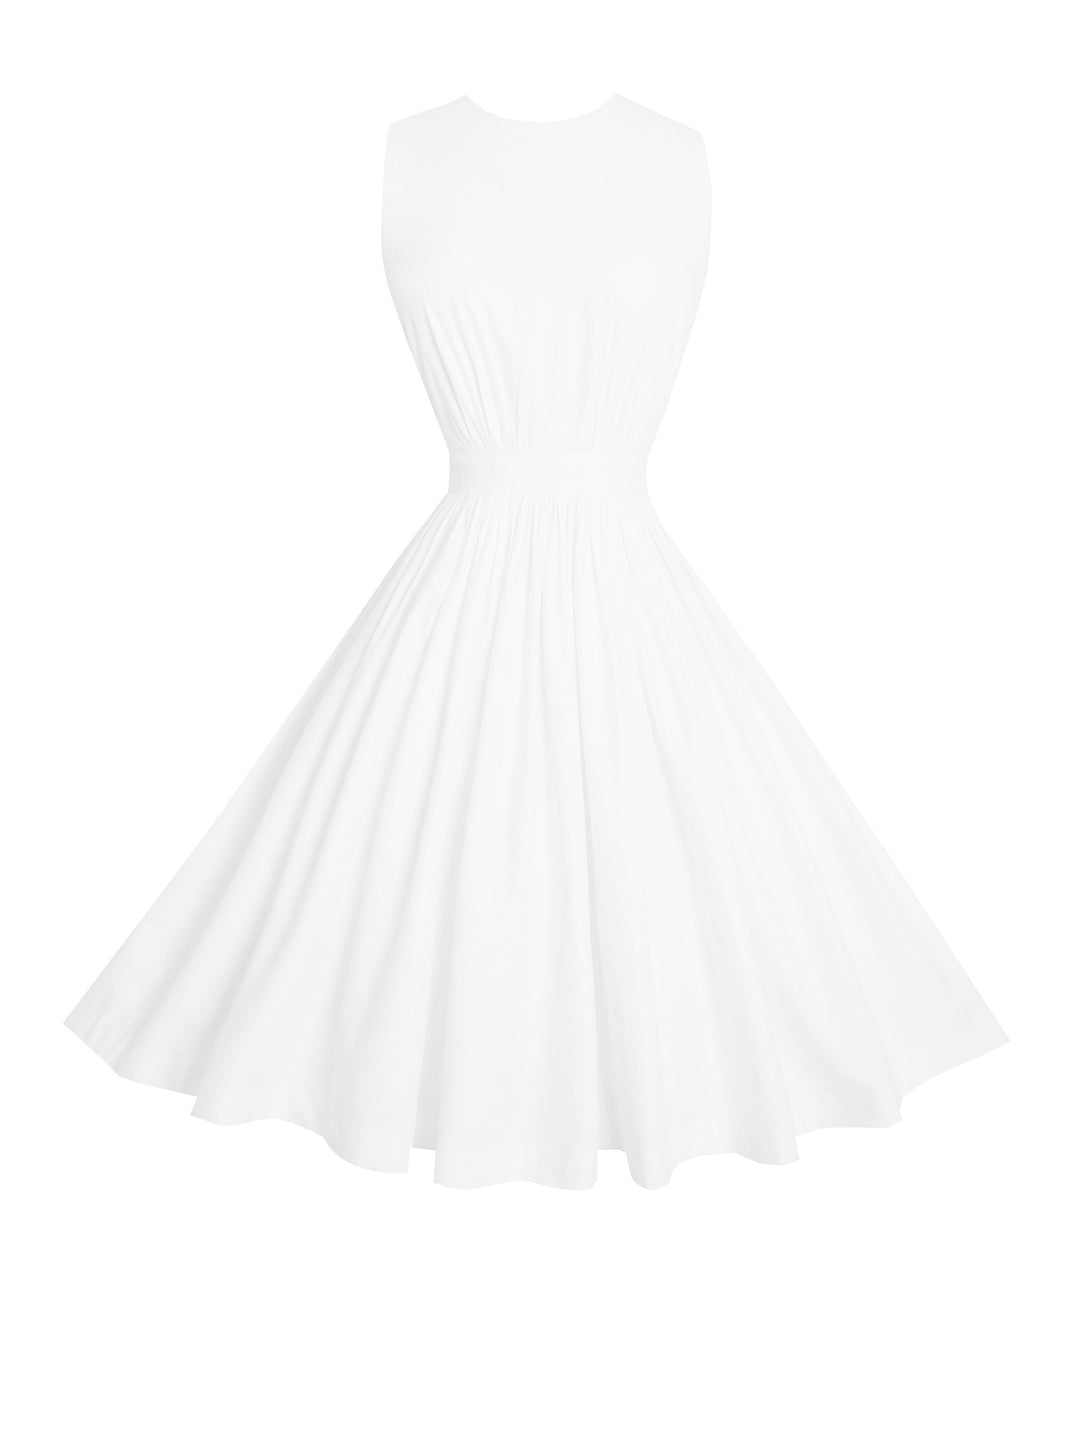 RTS - Size S - Clarence Dress in White Cotton